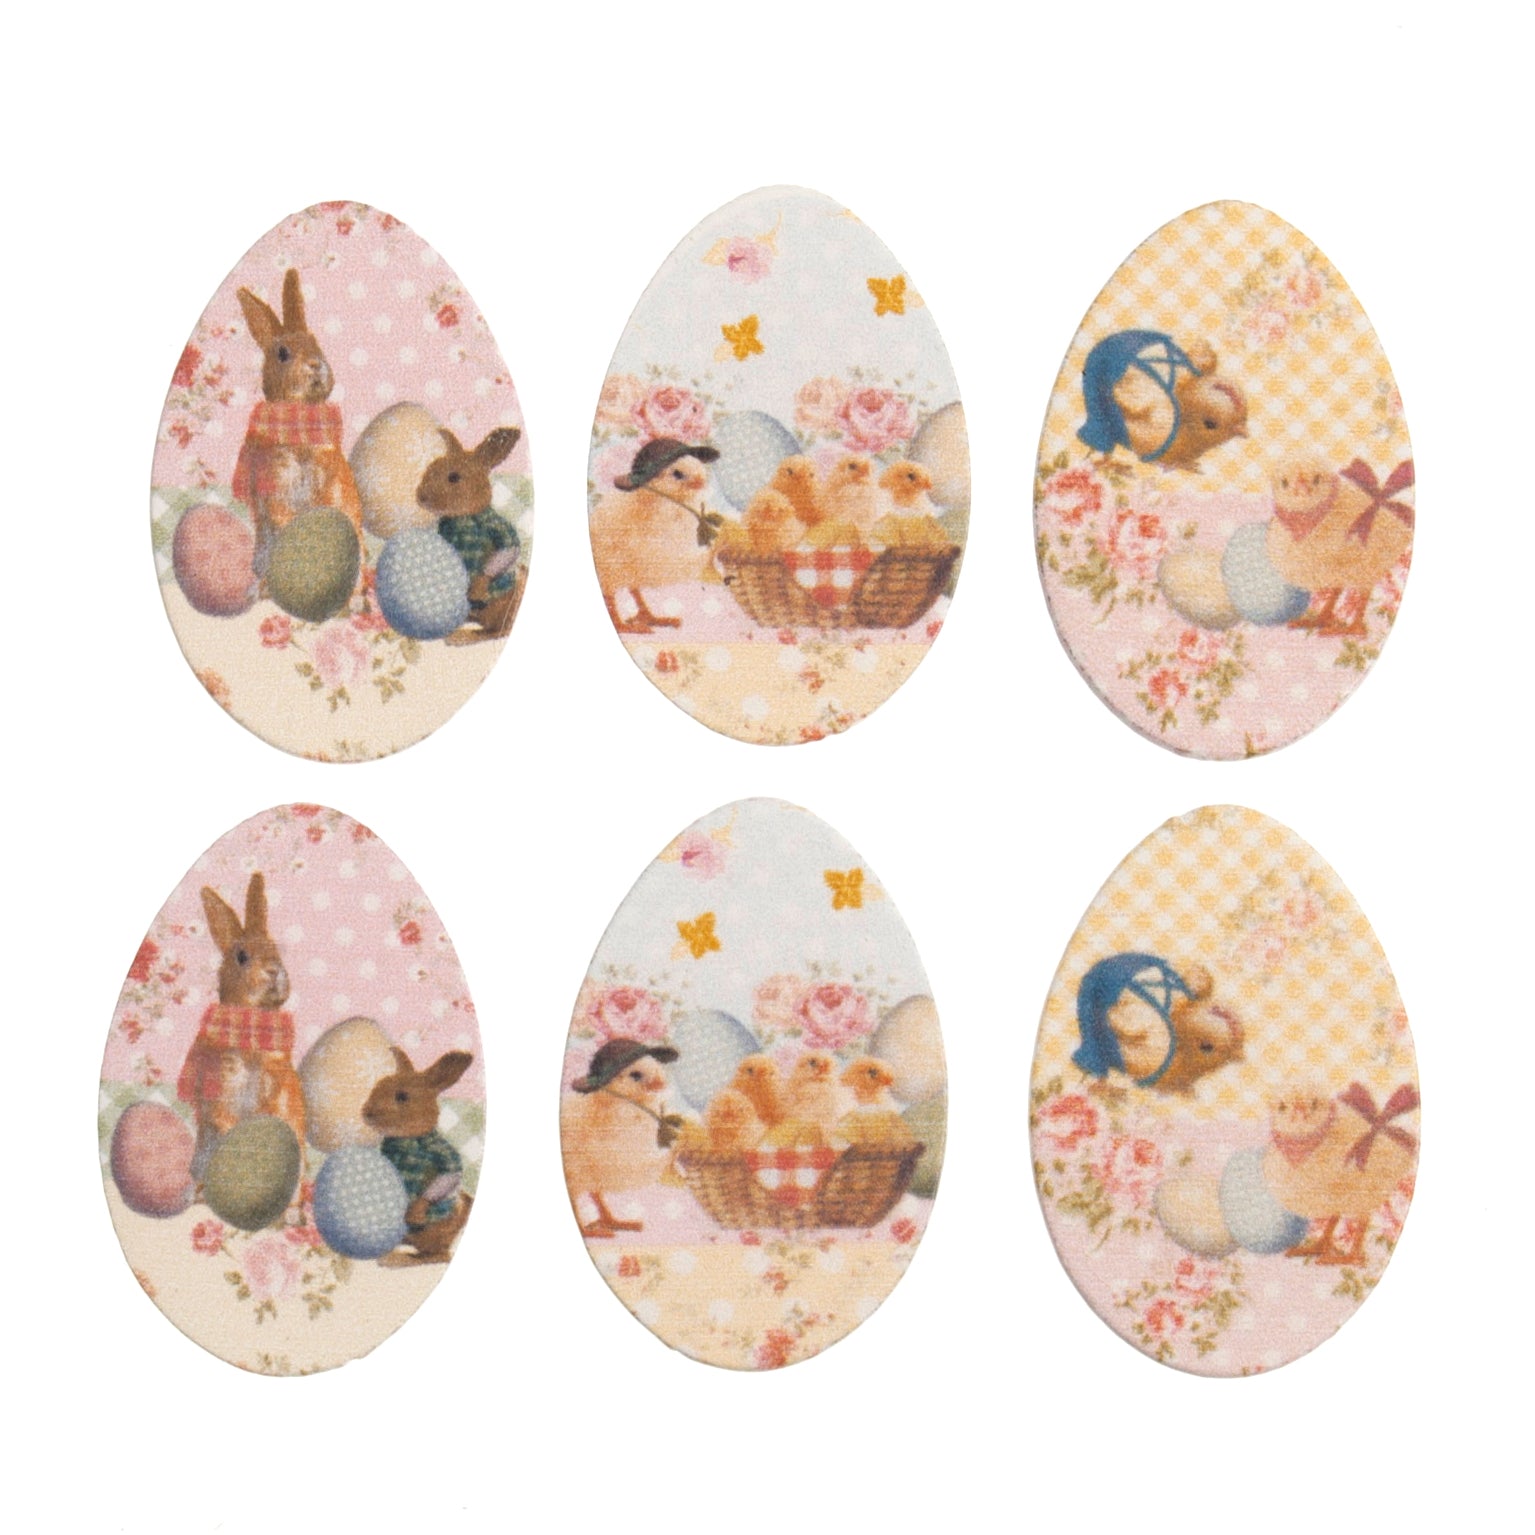 Craft Embellishments: Wooden Printed Easter Eggs - 6pc